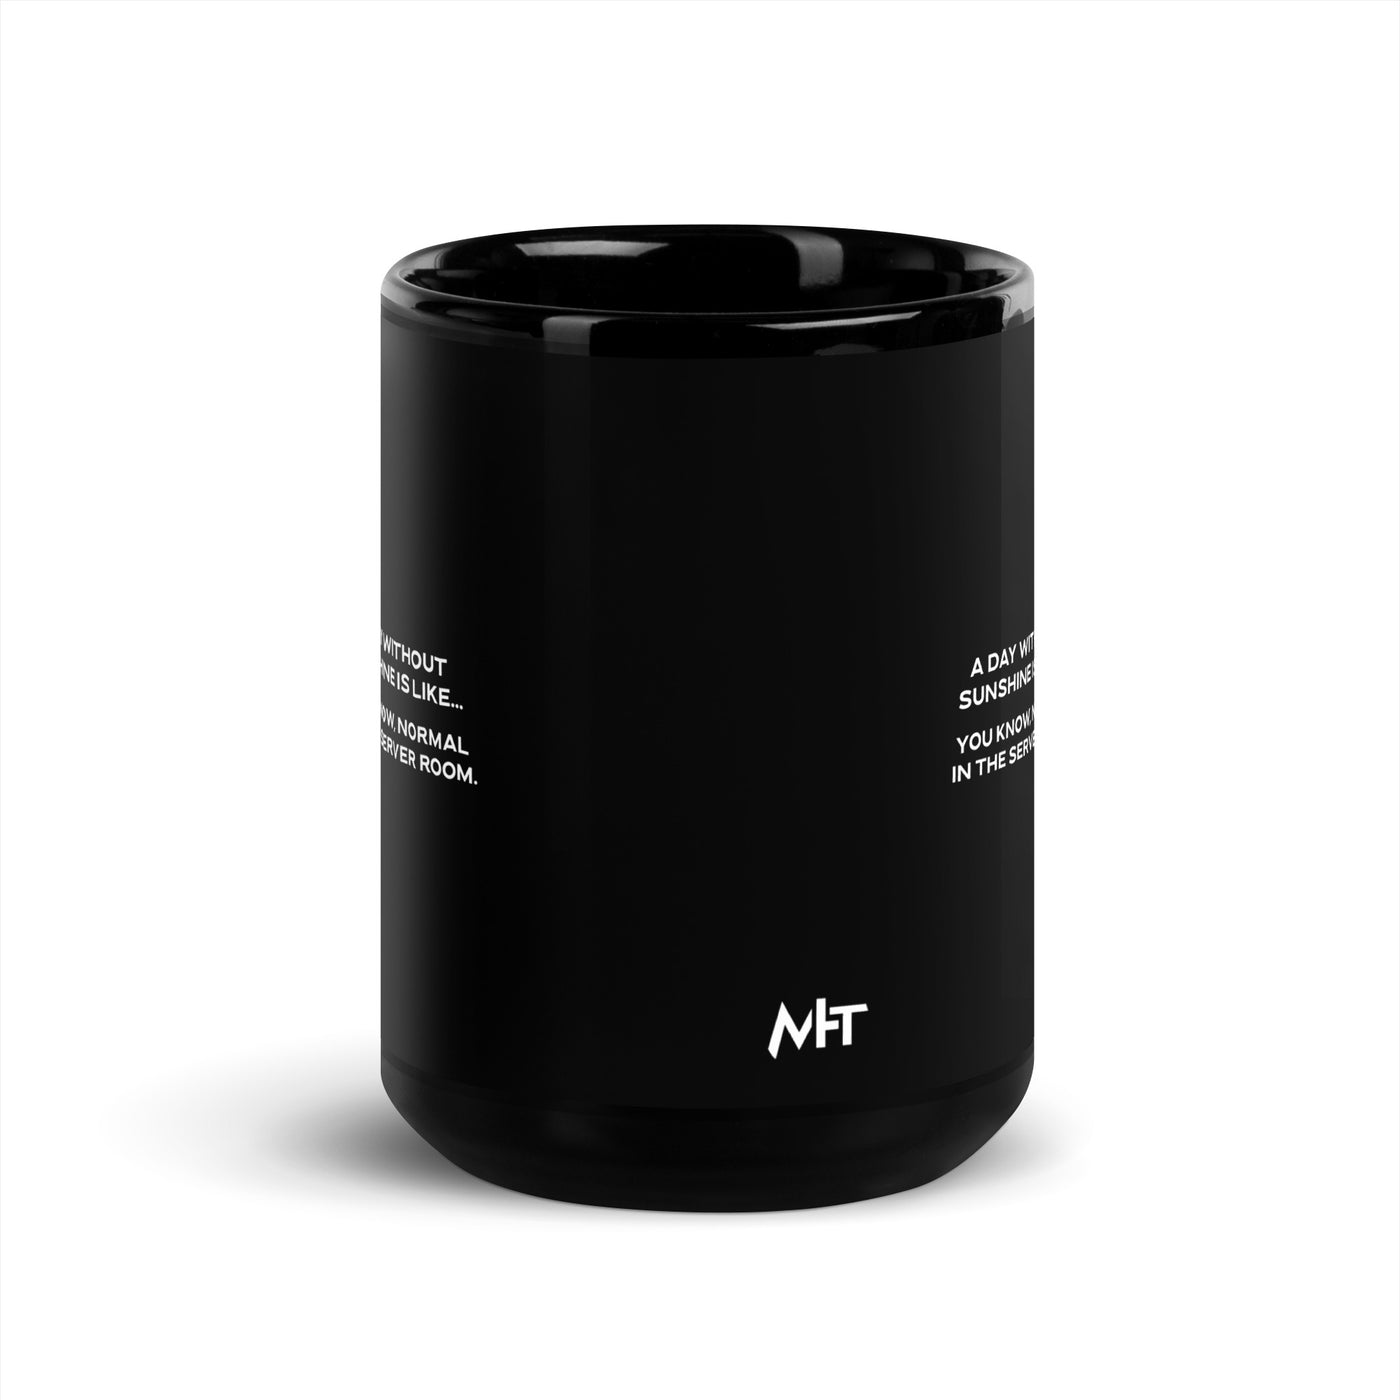 A day without sunshine is like you know, normal in the server room V1 - Black Glossy Mug